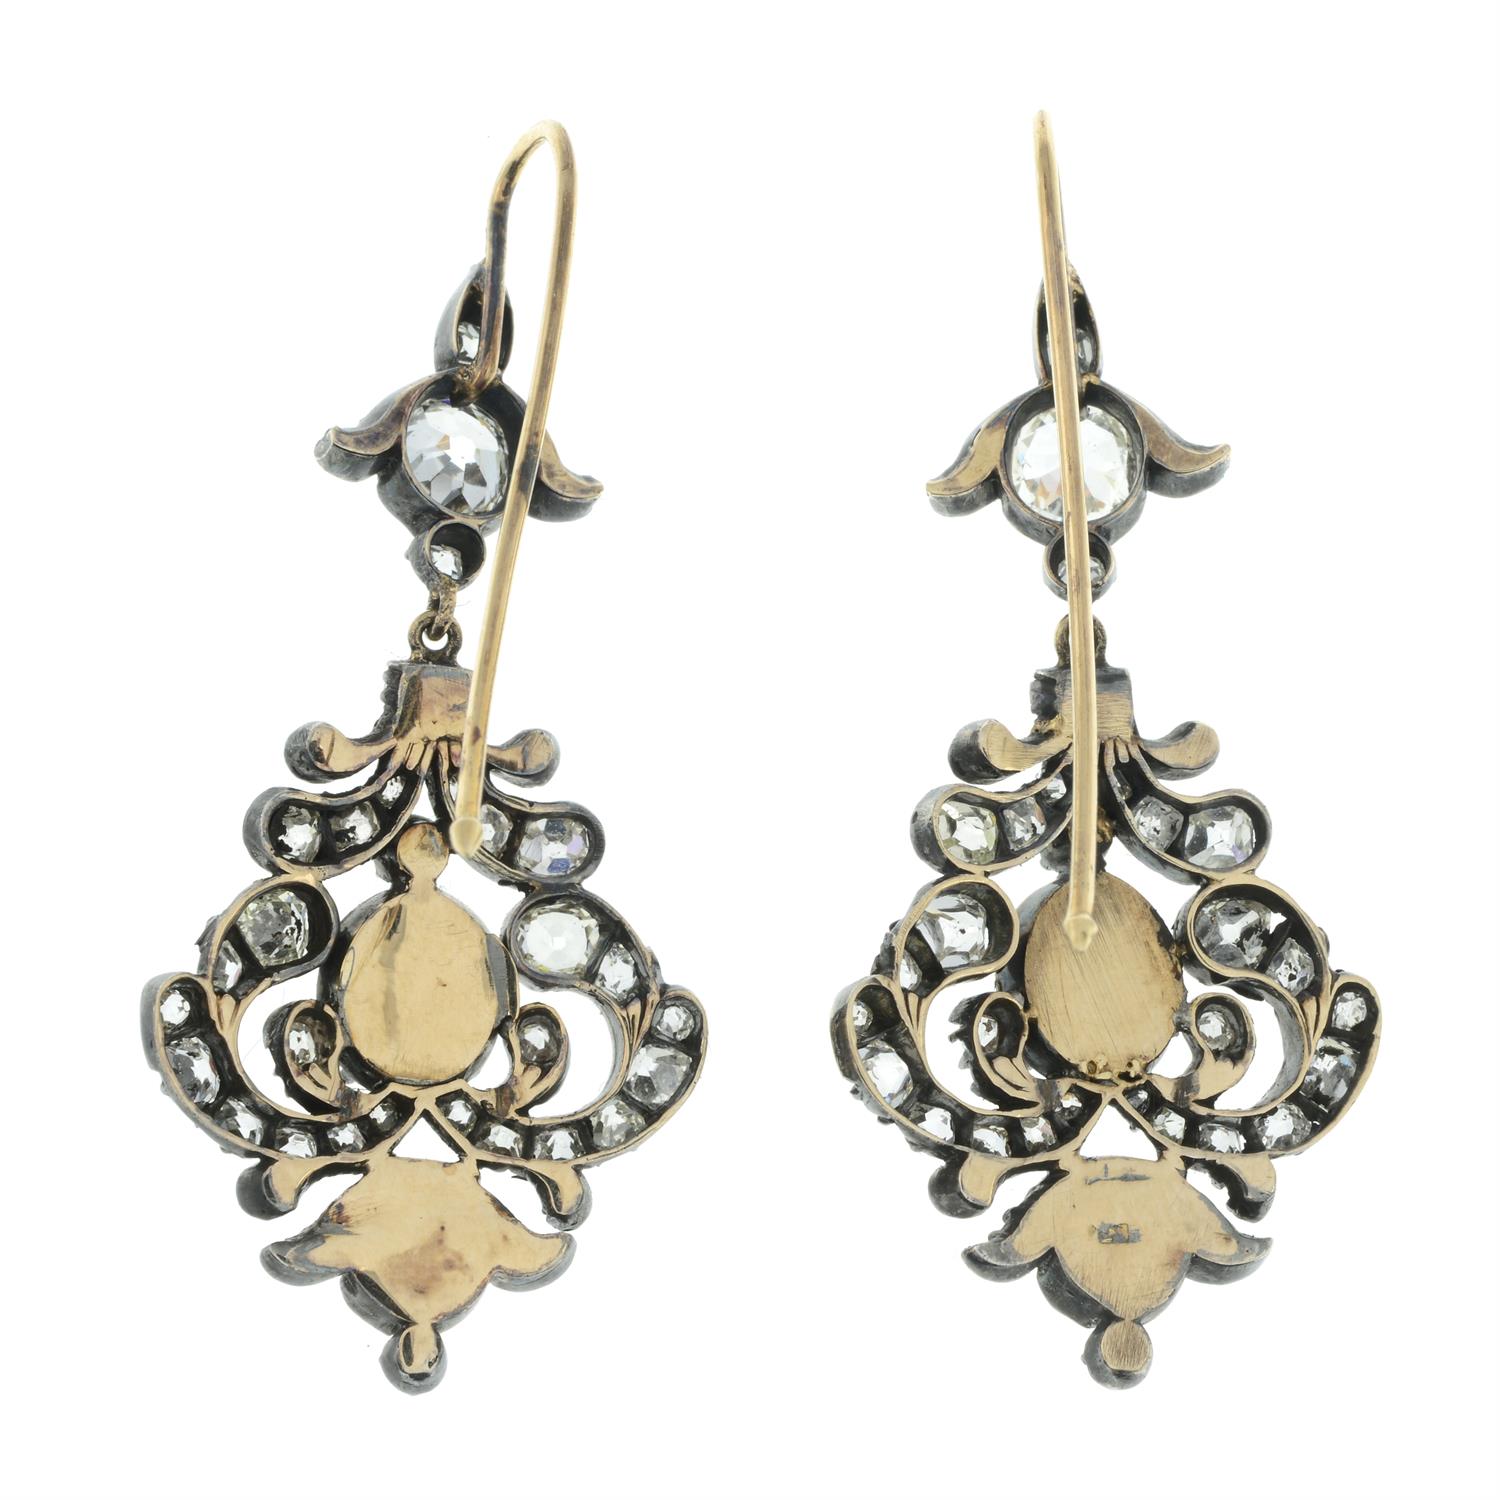 Old and rose-cut diamond earrings - Image 3 of 4